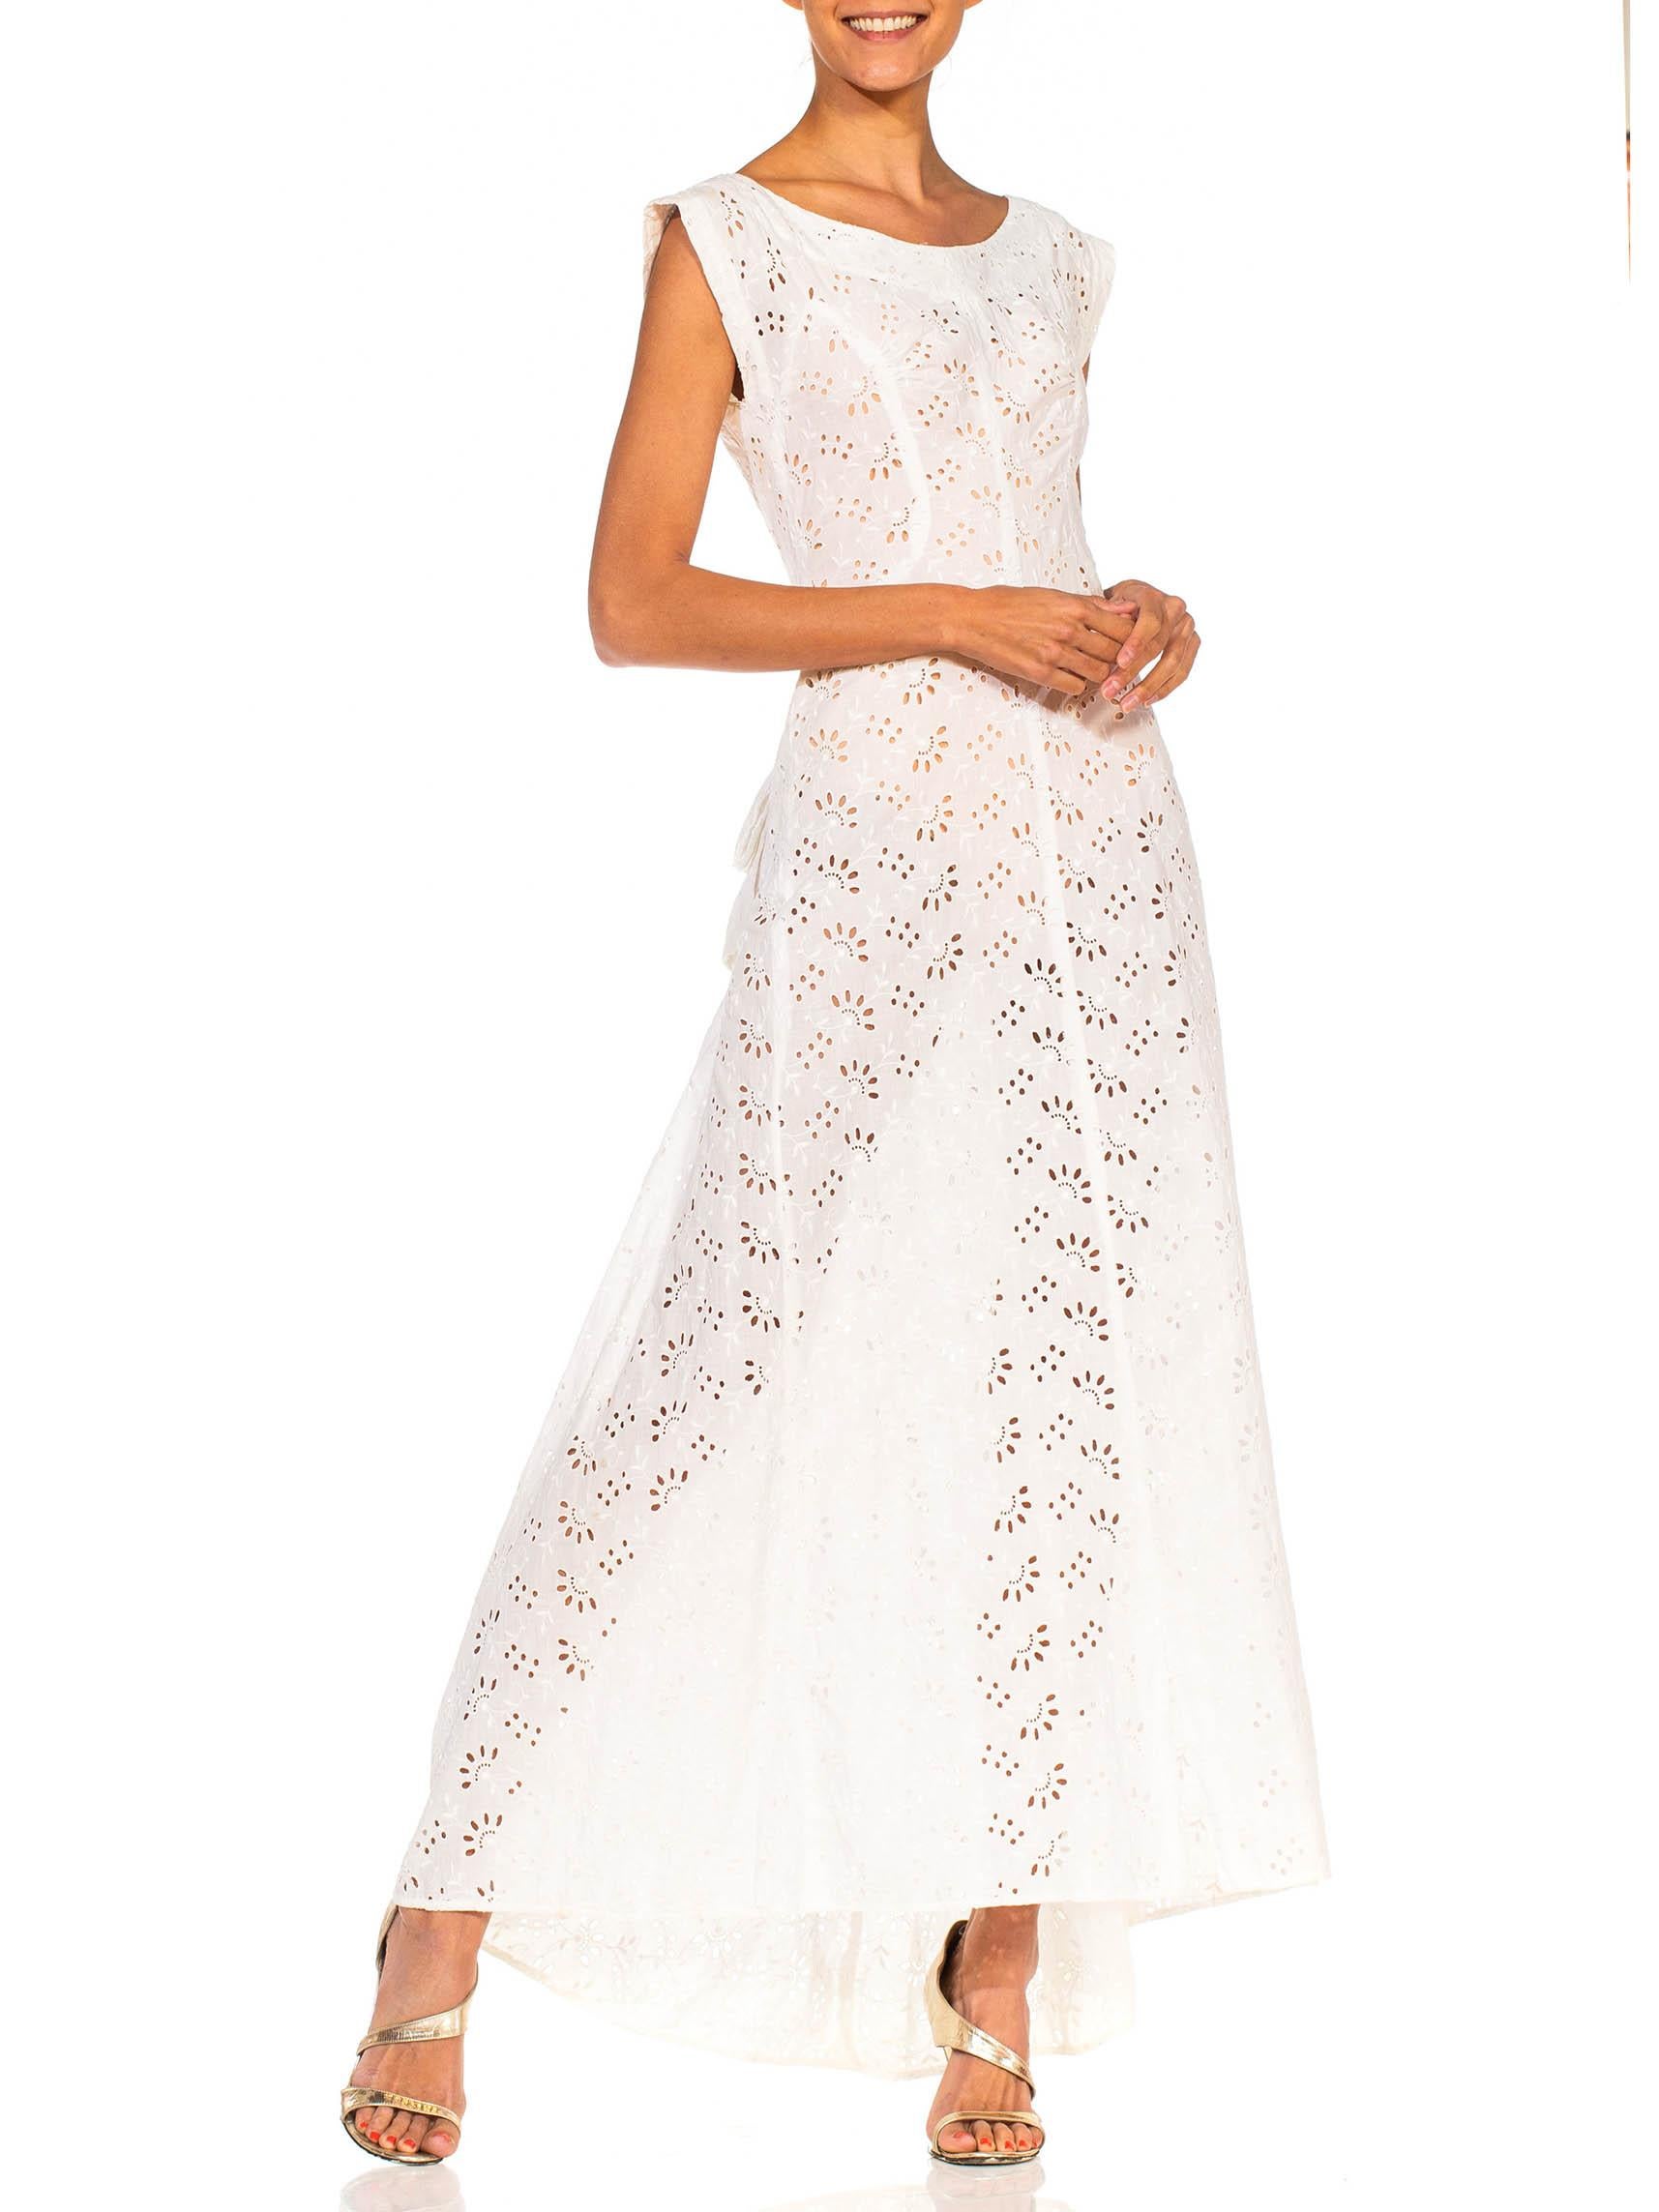 1930S White Cotton Eyelet Lace Summer Lawn Party Dress With Mini Bustle For Sale 4